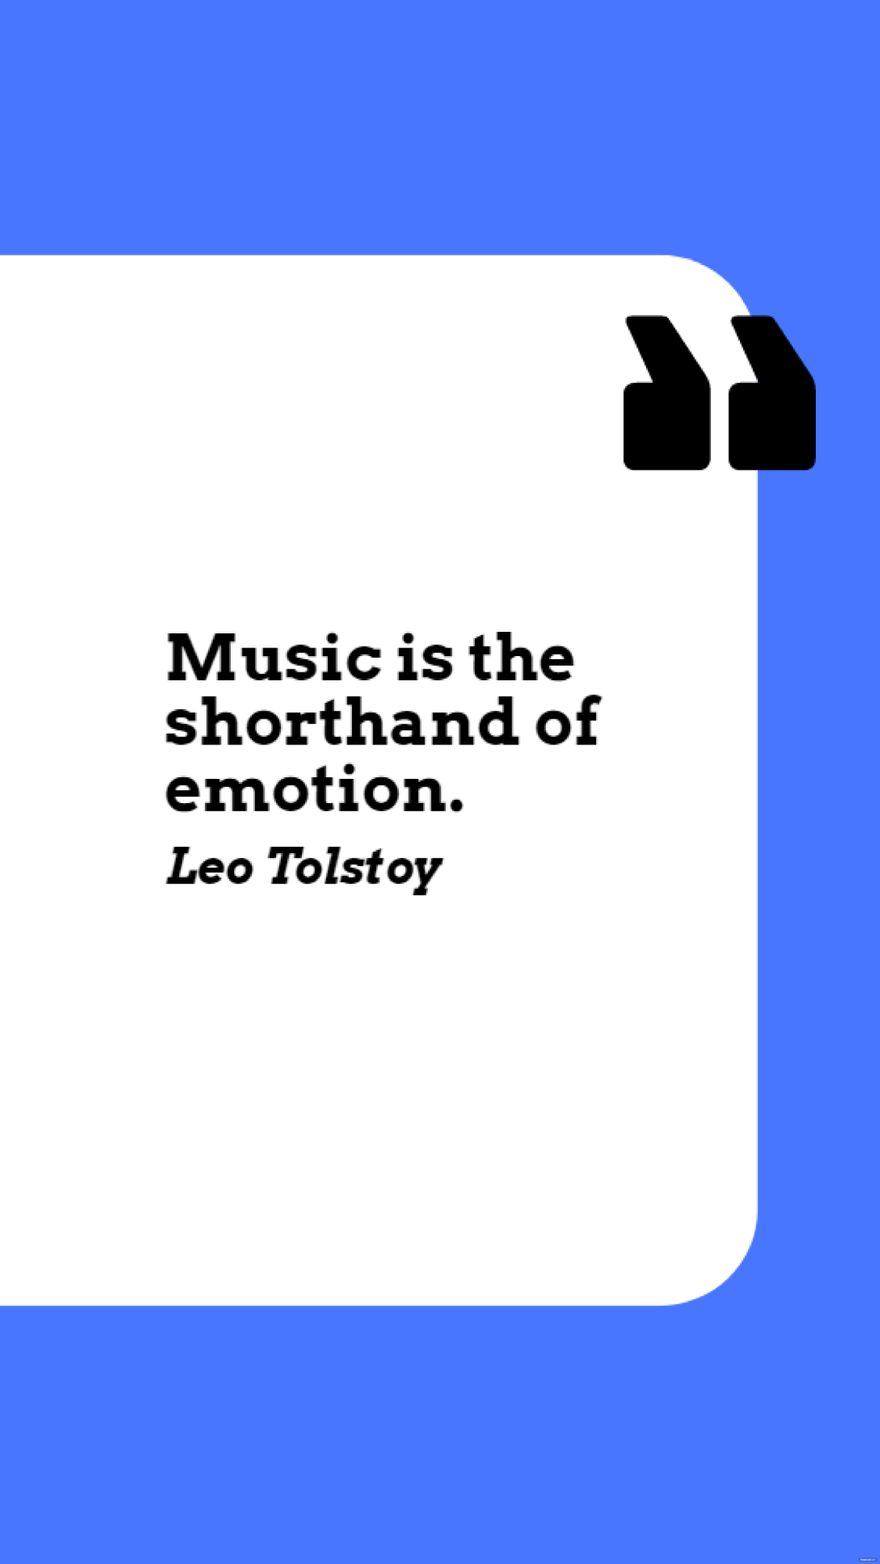 Free Leo Tolstoy - Music is the shorthand of emotion. in JPG